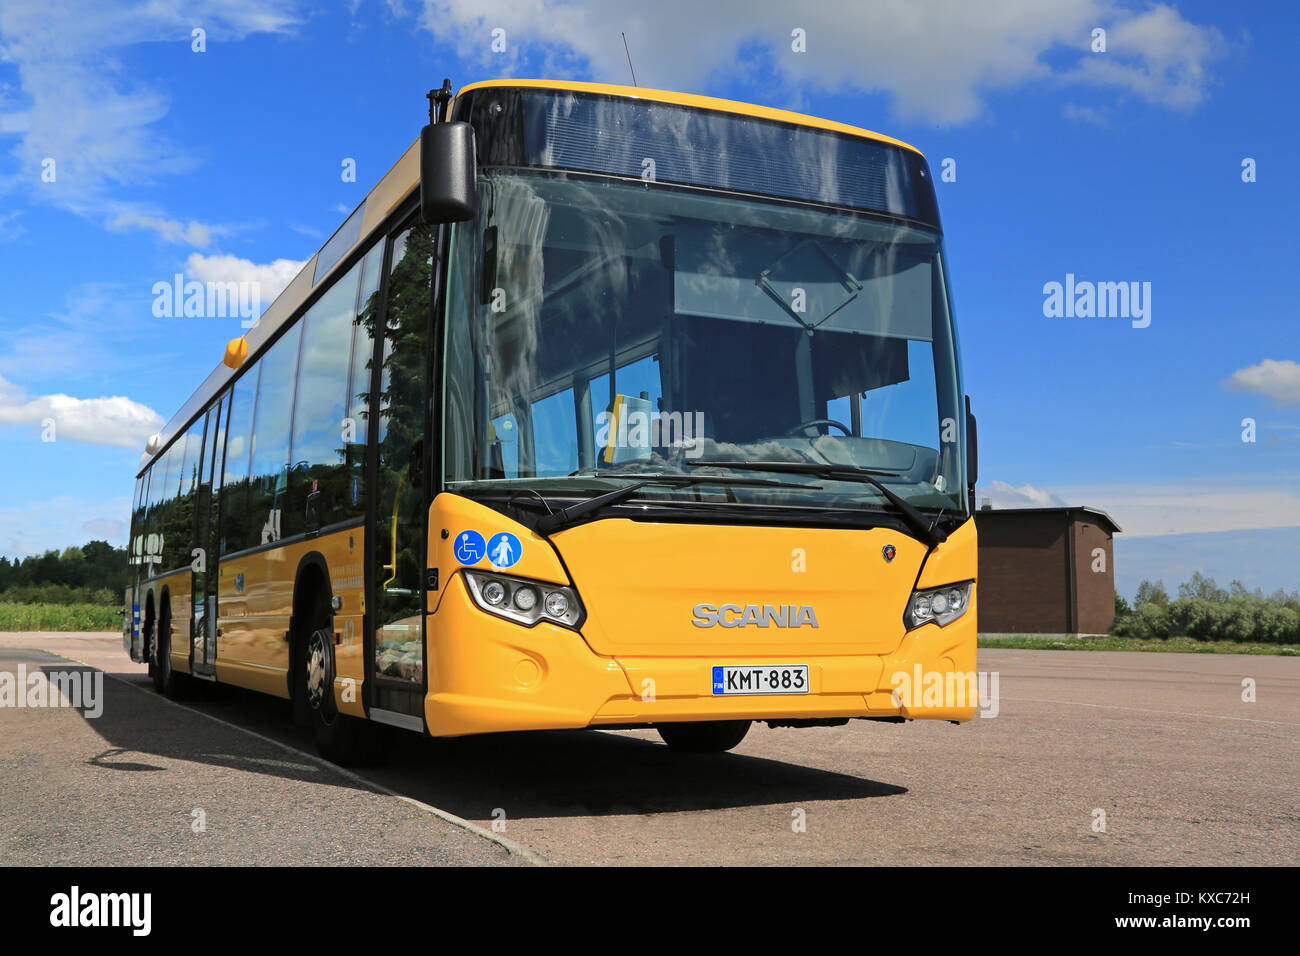 PAIMIO, FINLAND - JULY 19, 2014: Yellow Scania Citywide bus waits for passengers at a bus stop. Scania Citywide is a single-deck city or intercity bus Stock Photo